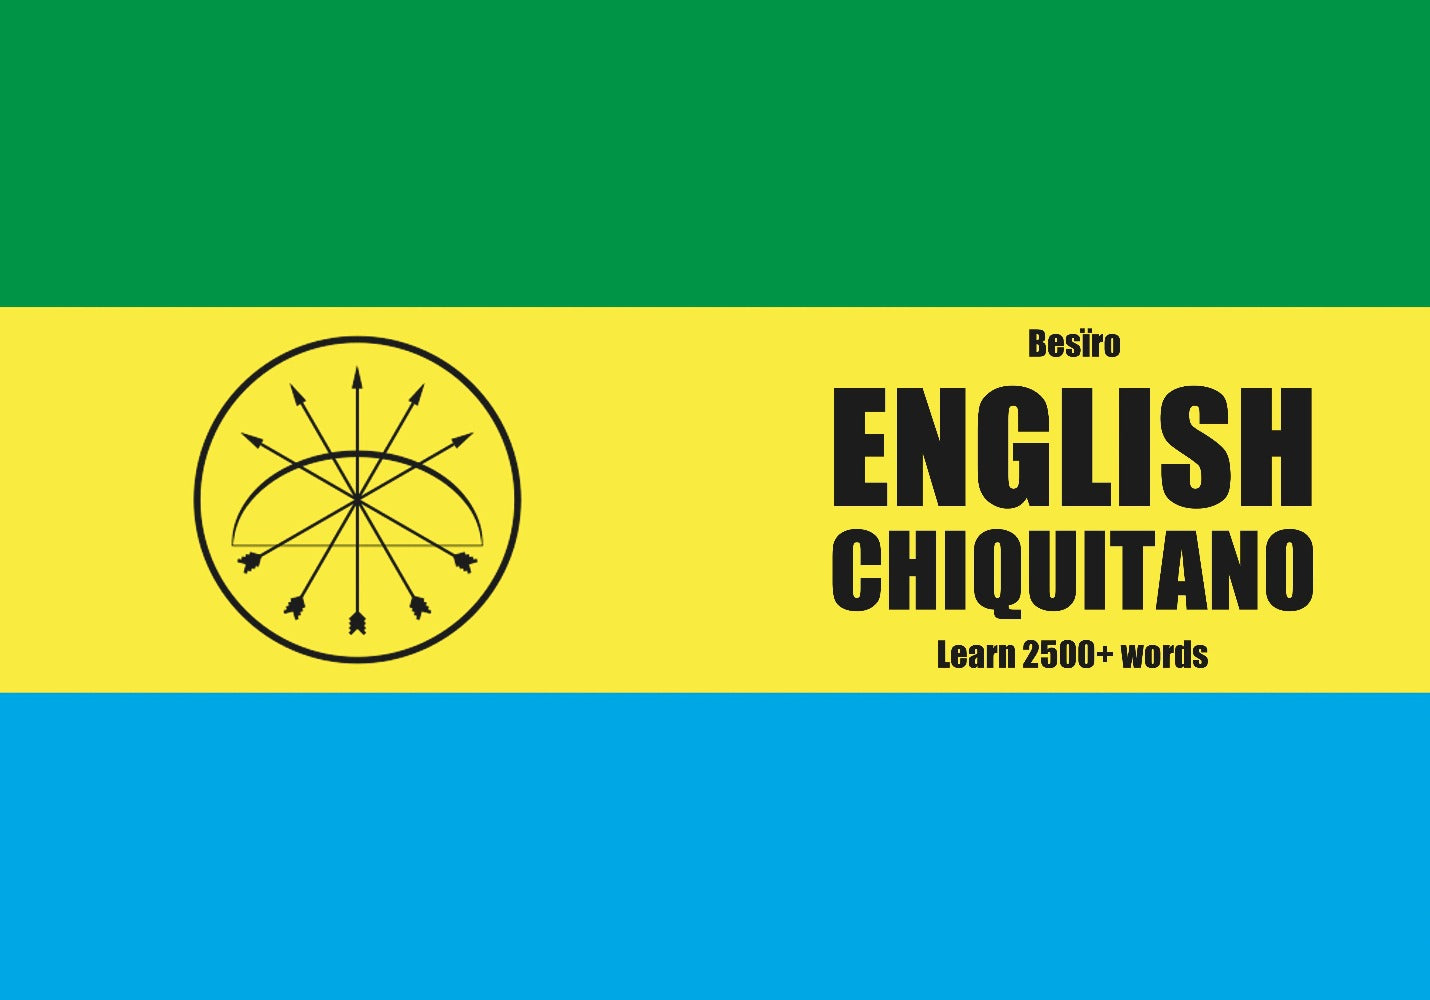 Chiquitano language learning notebook cover